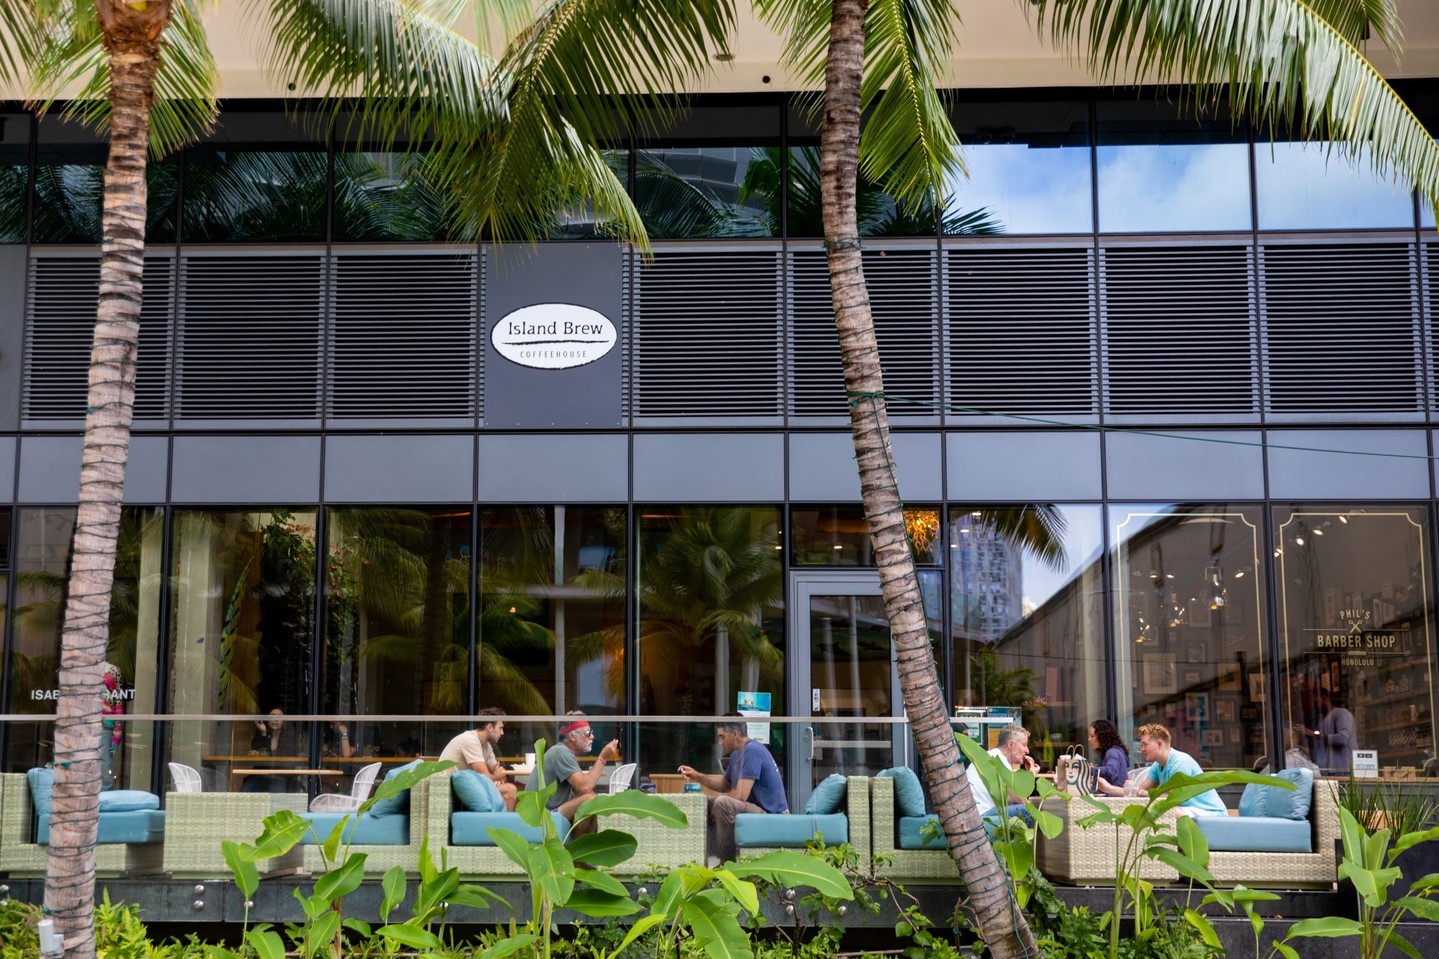 Visiting @islandbrewcoffeehouse is a perfect way to perk up your Monday. Choose from a variety of 100% Hawai‘i grown coffees available on the shaded lānai, in their relaxing indoor dining space, or grab-and-go to one of our neighborhood parks.